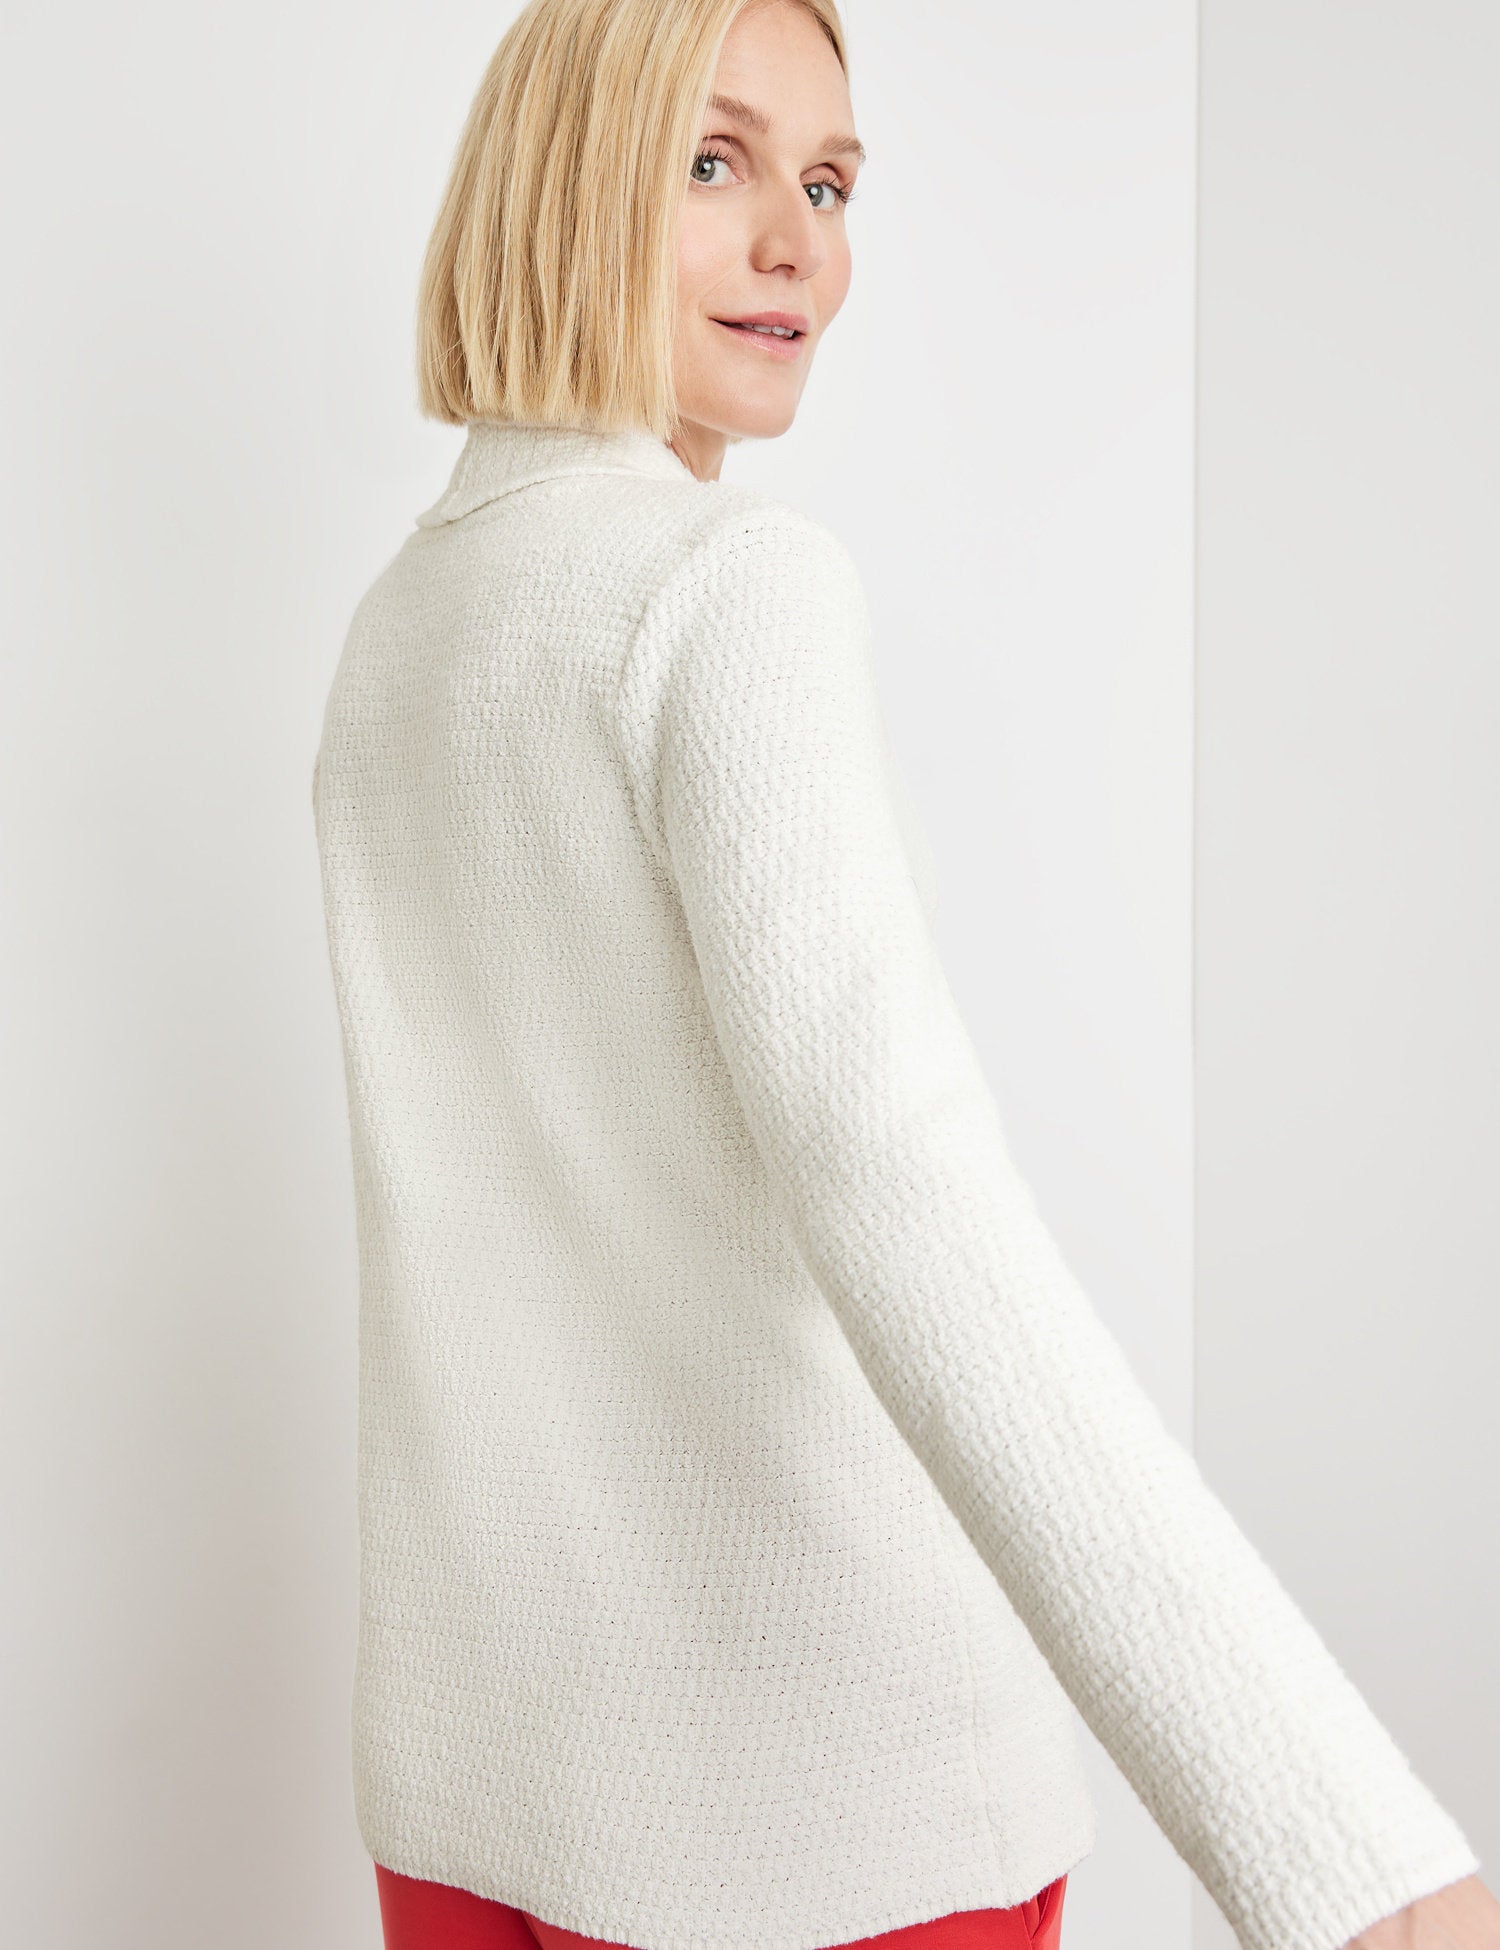 Cardigan In A Textured Knit With A Double-Breasted Button Placket_330019-35738_99700_06